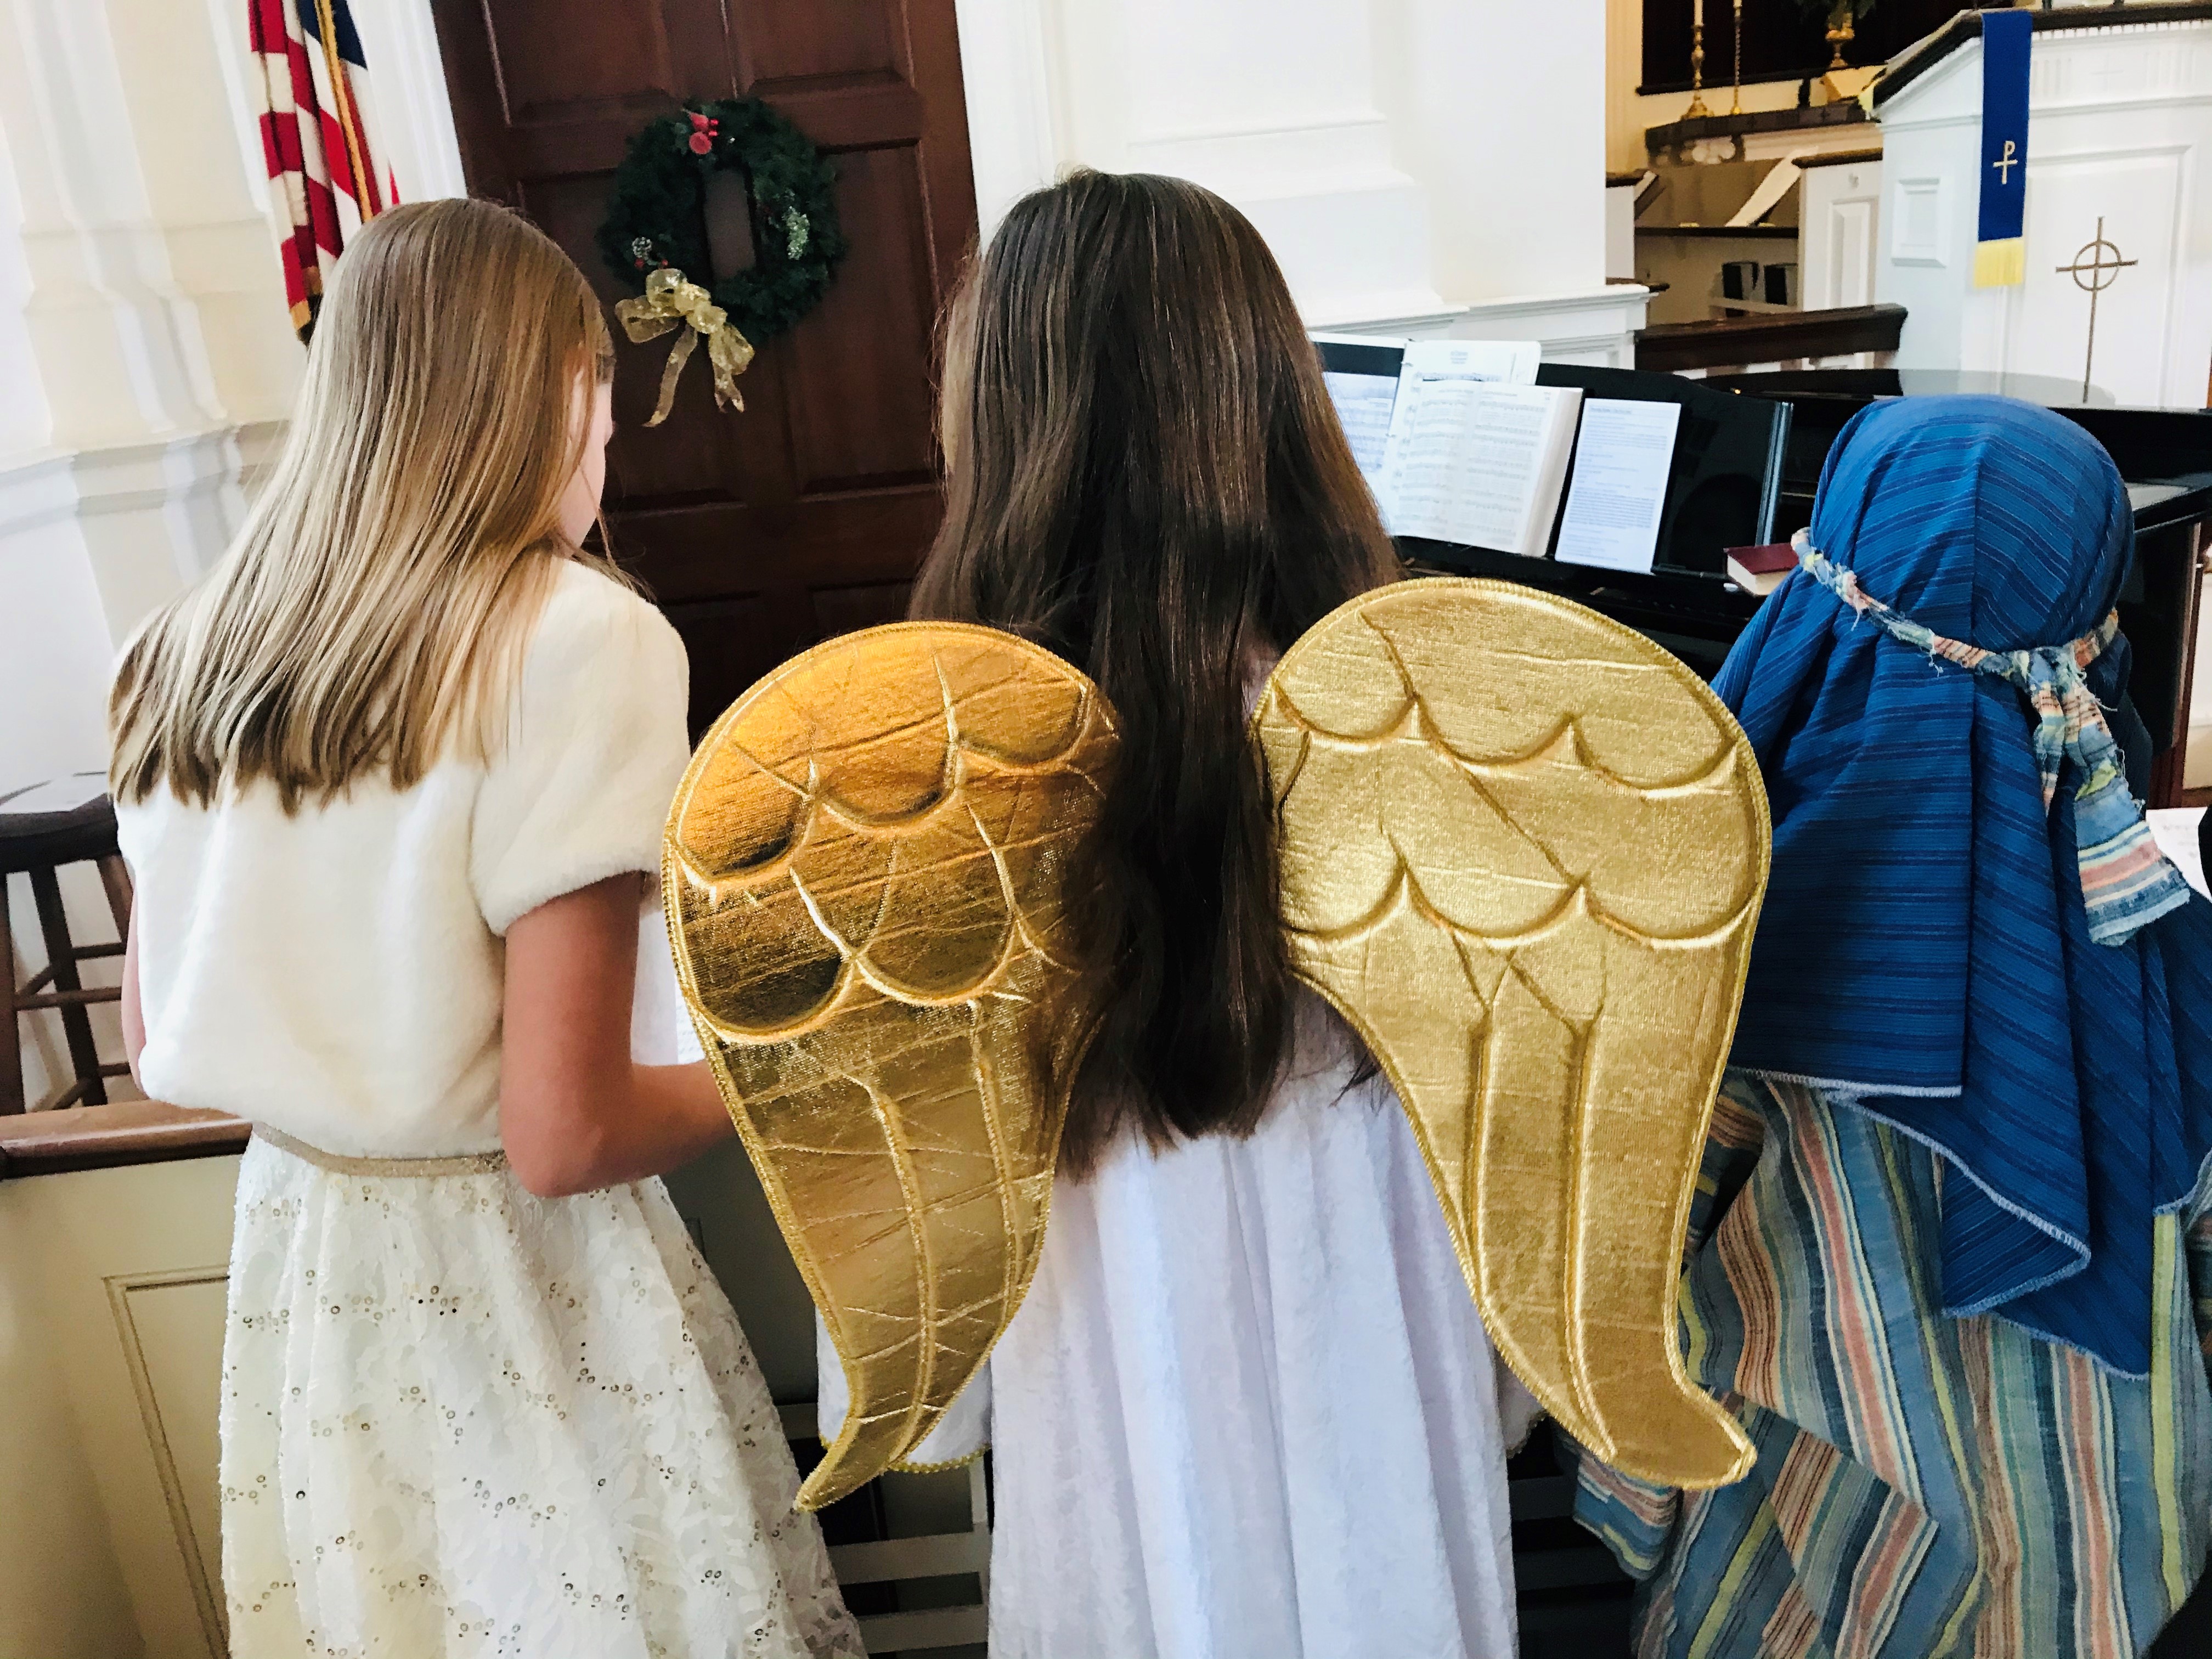 children of the choir dressed as angels and a shepard